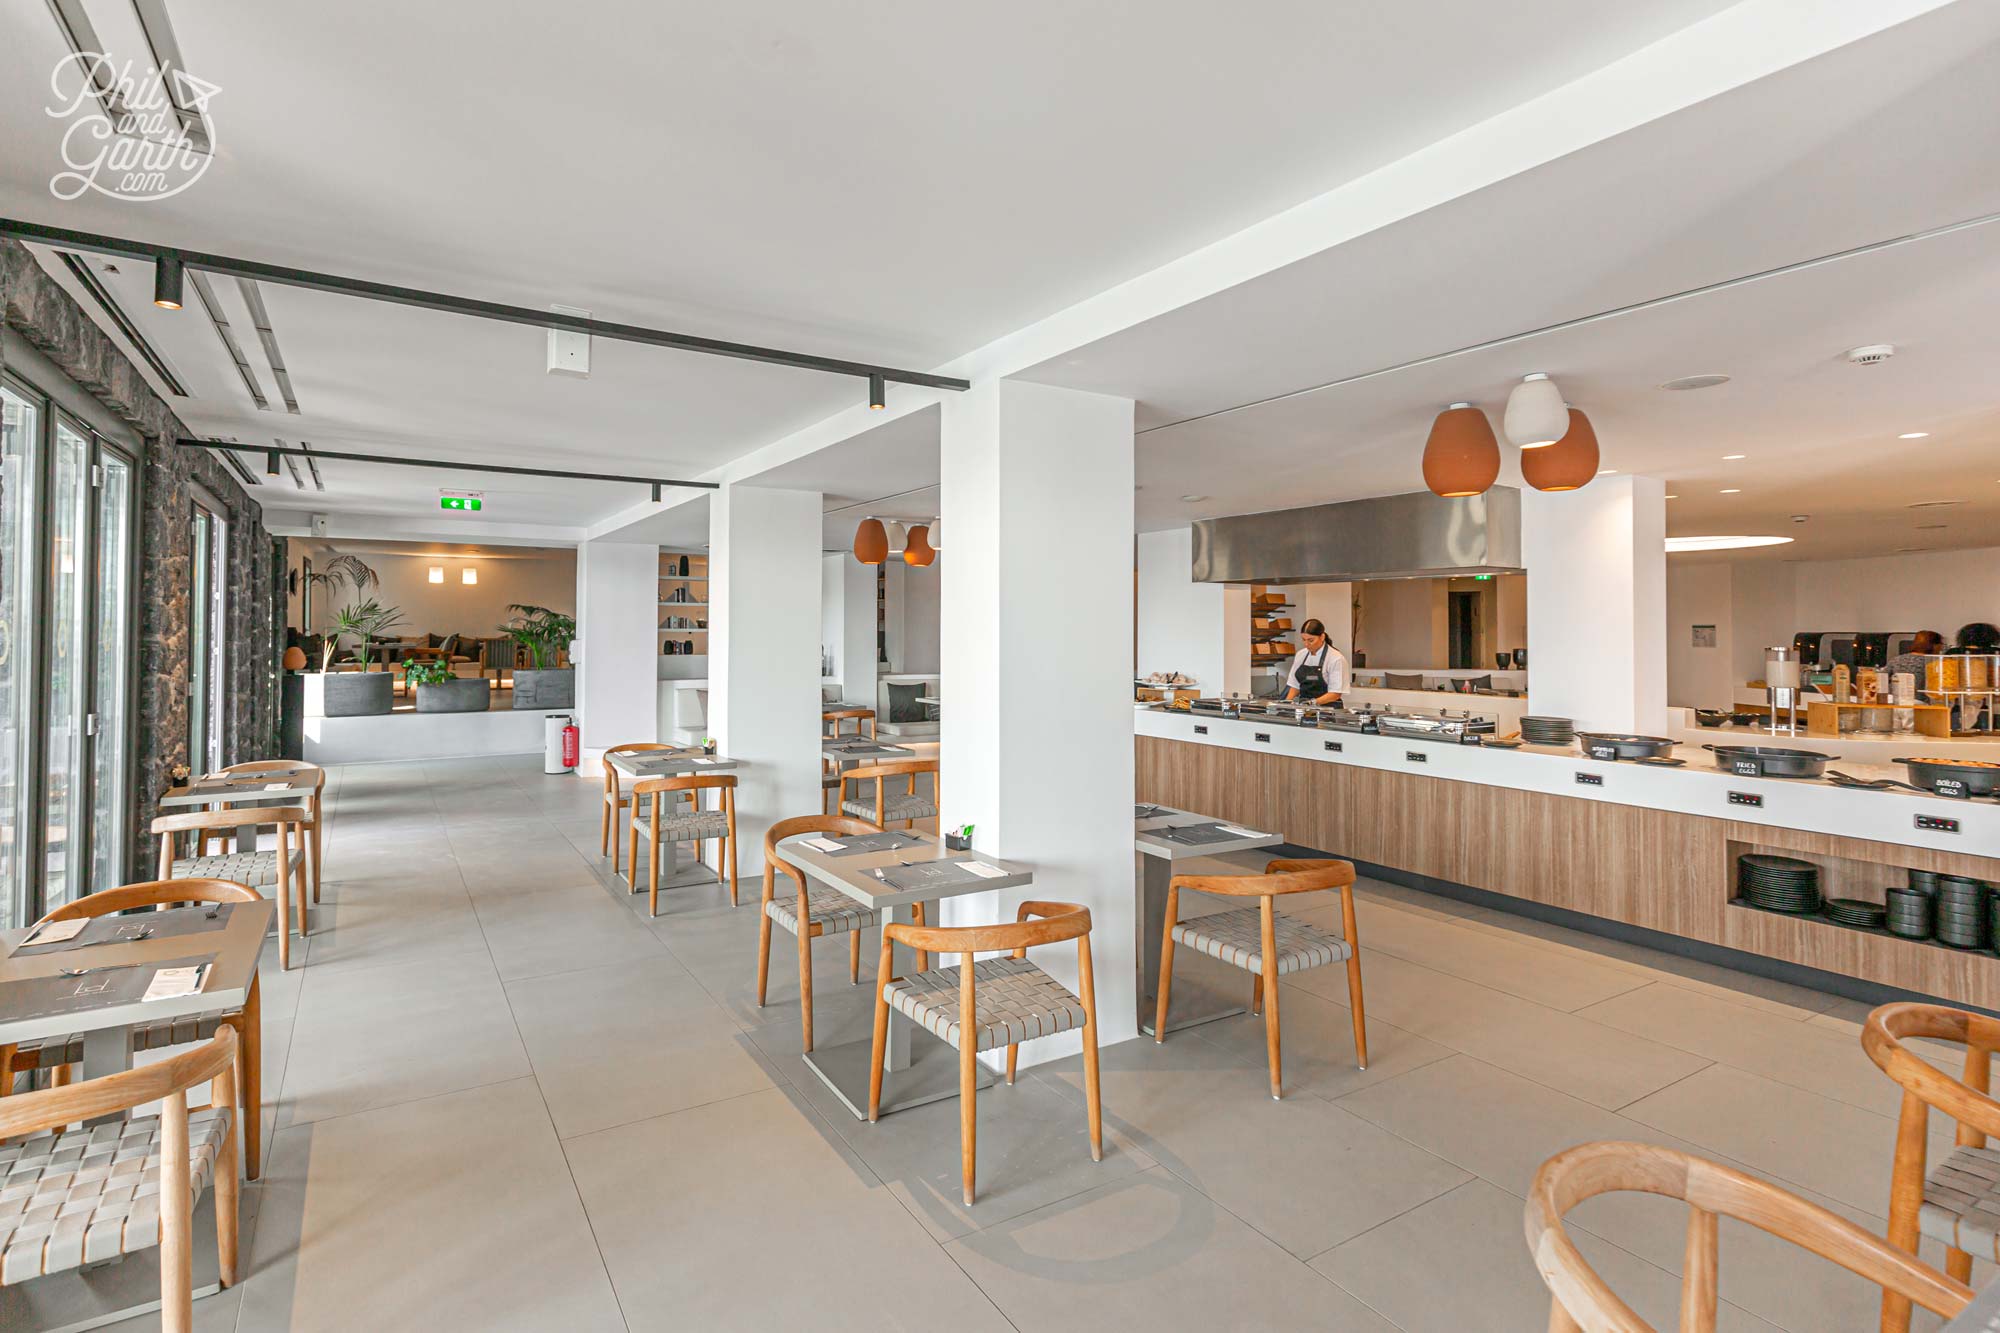 The breakfast area is modern and airy